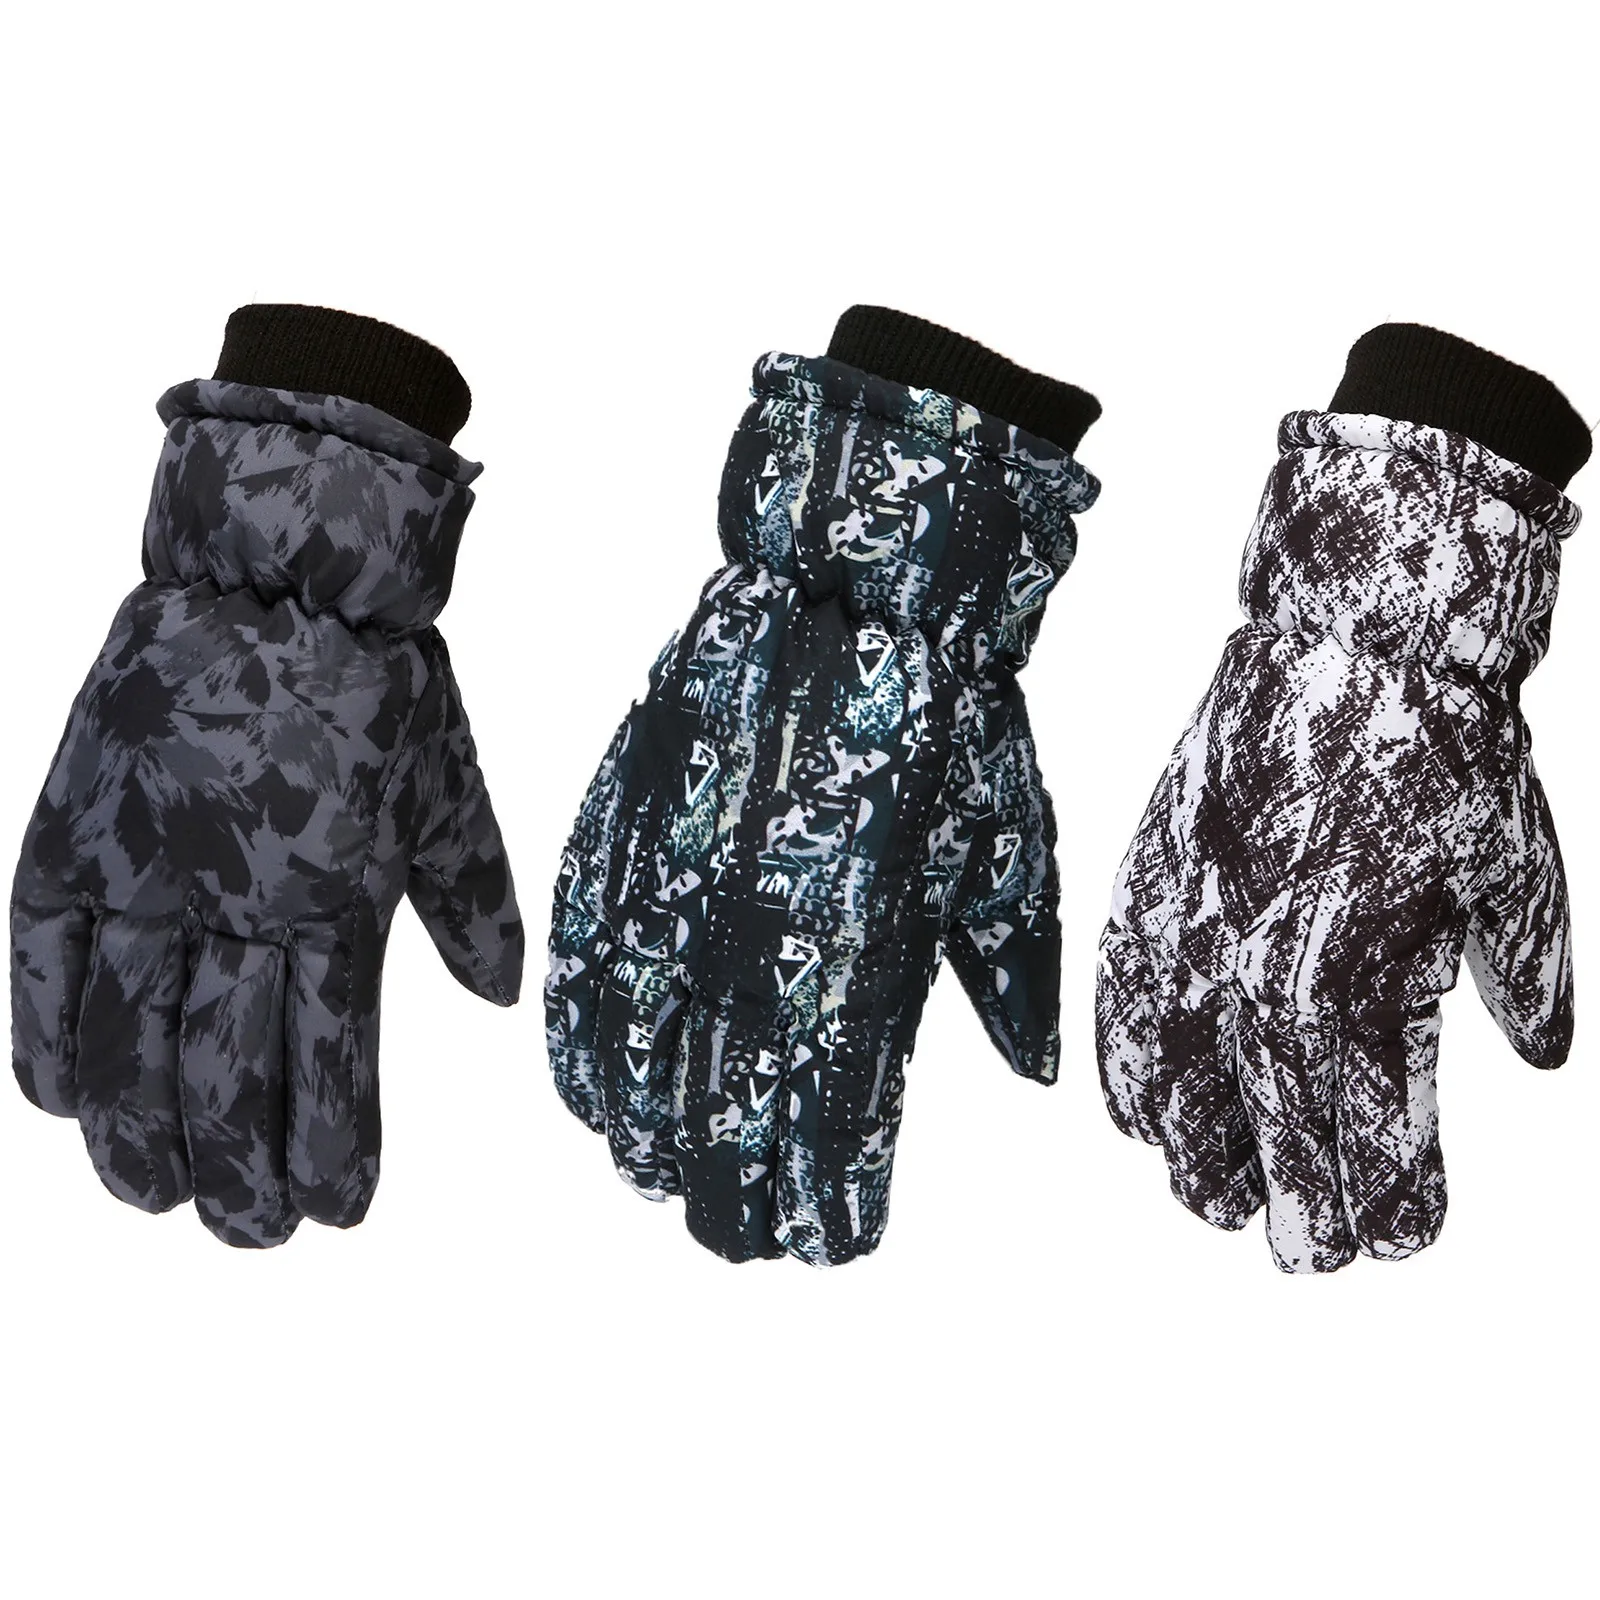 

Children Cycling Climbing Outdoor Gloves Kids Ski Gloves Fashion Camouflage Print Non-slip Waterproof Windproof Coloful Gloves